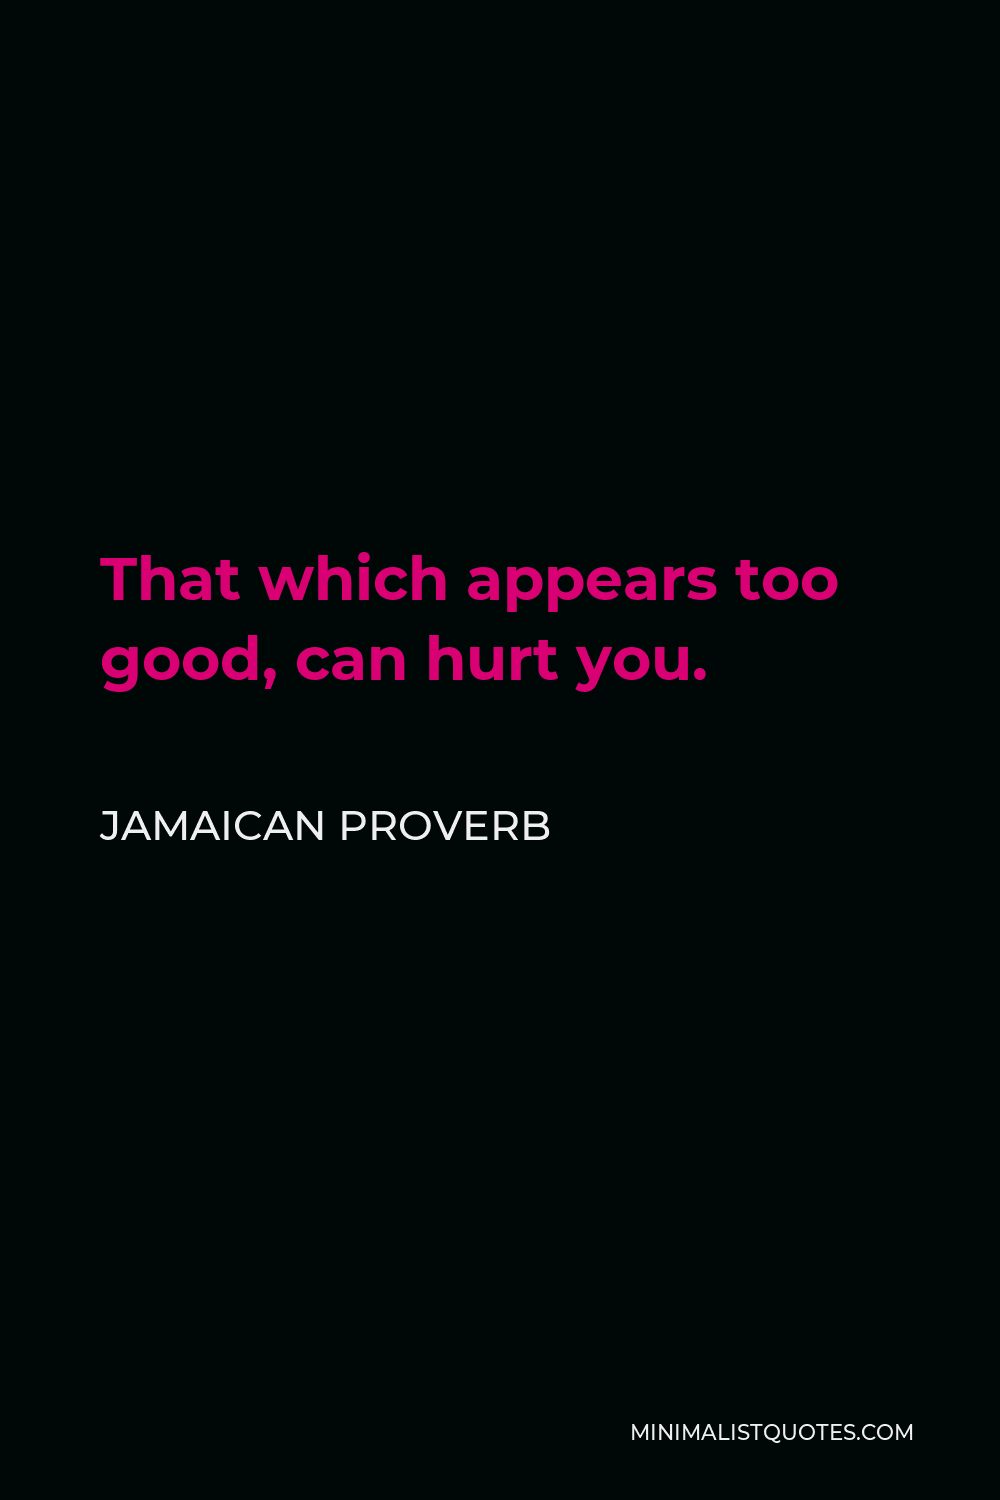 Jamaican Proverb Quote - That which appears too good, can hurt you.